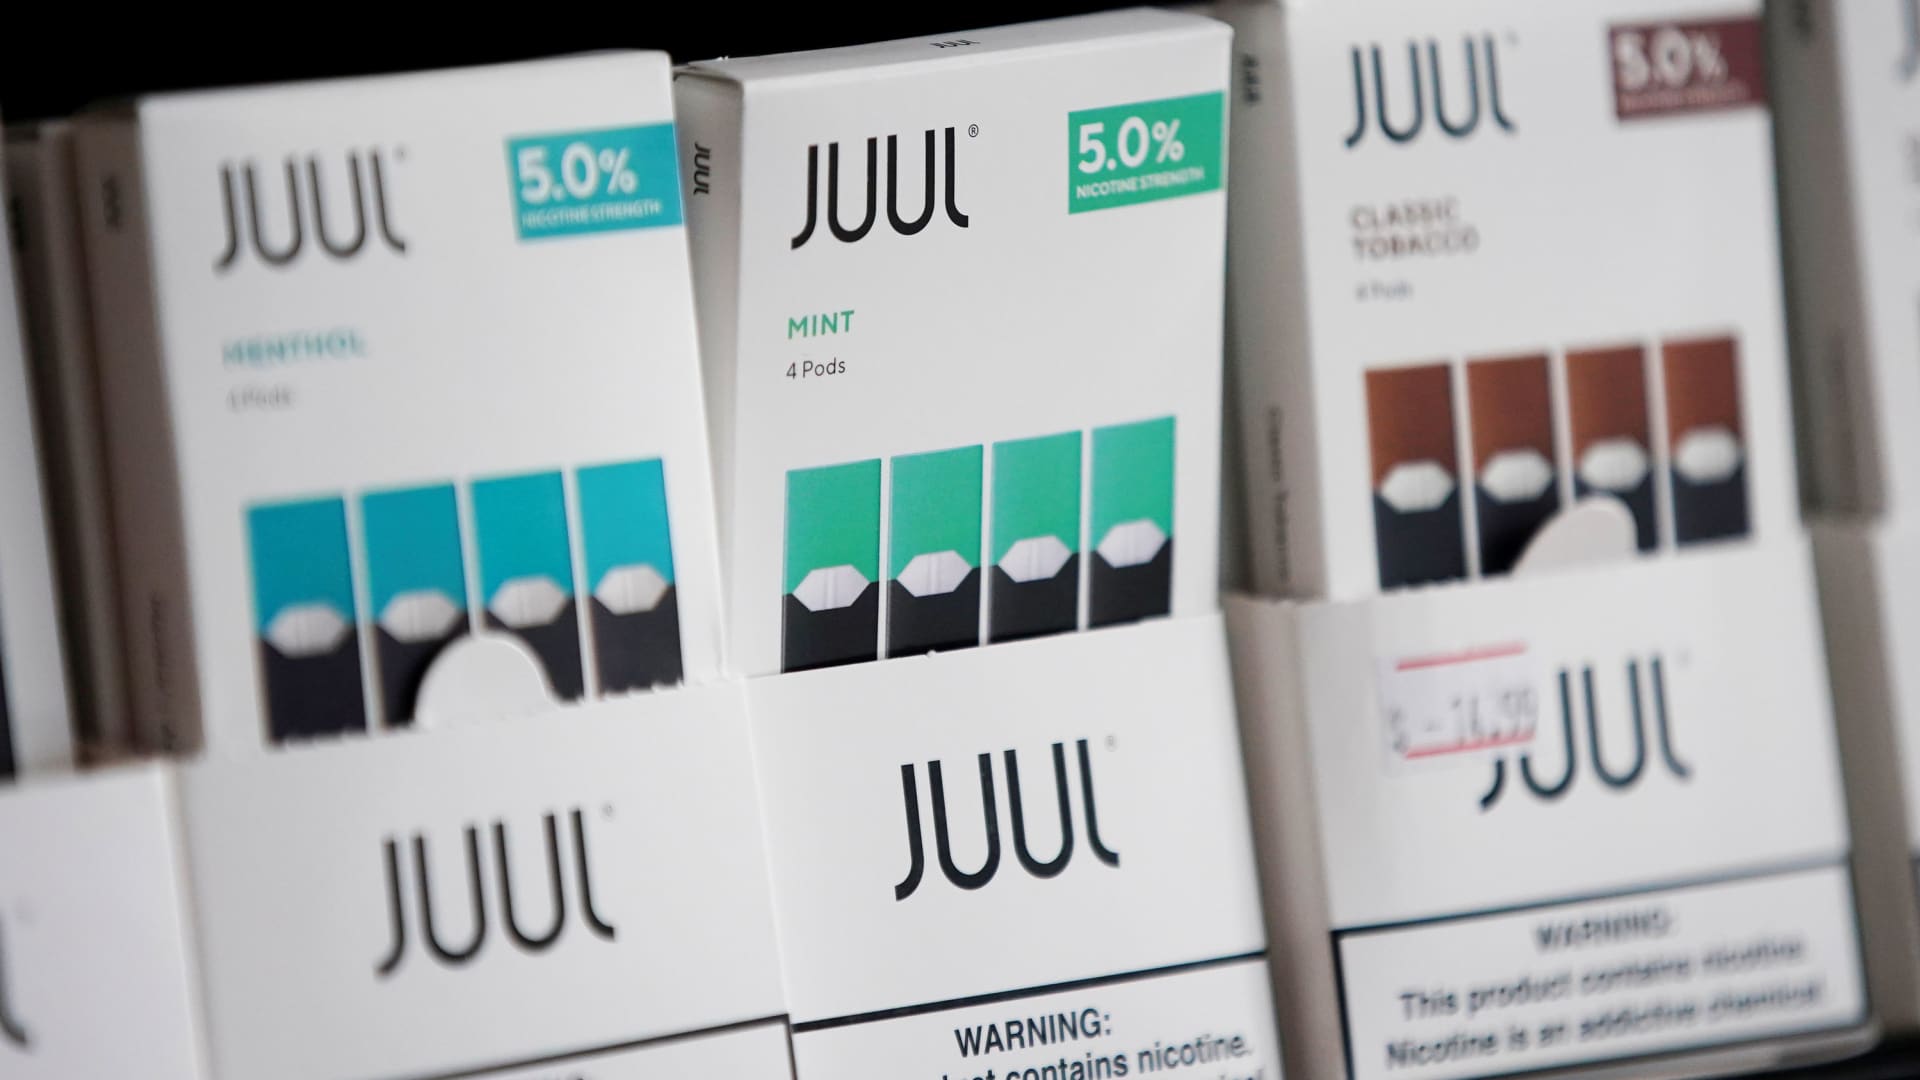 Juul asks court for temporary block on FDA's ban of its e-cigarettes